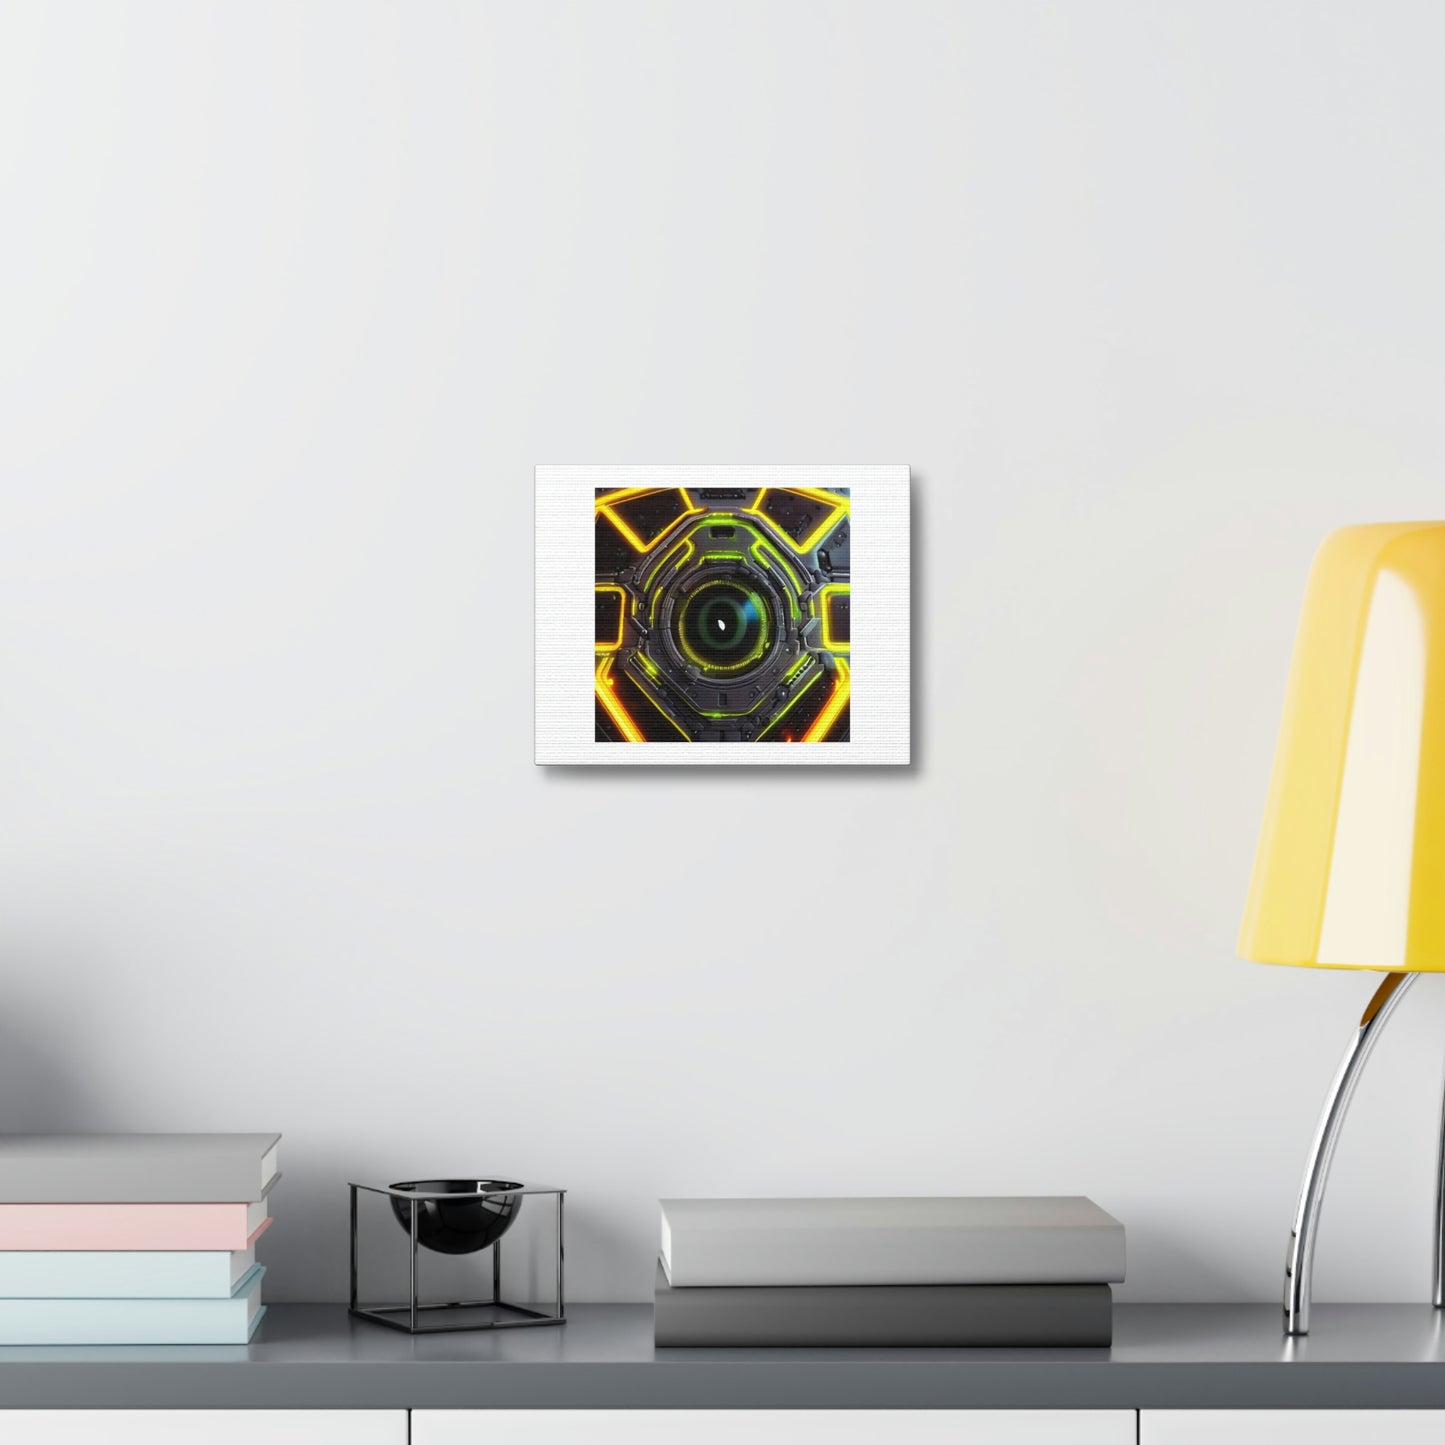 Cybernetic Security Shield With Cybernetic Human Eye Digital Art 'Designed by AI' on Satin Canvas